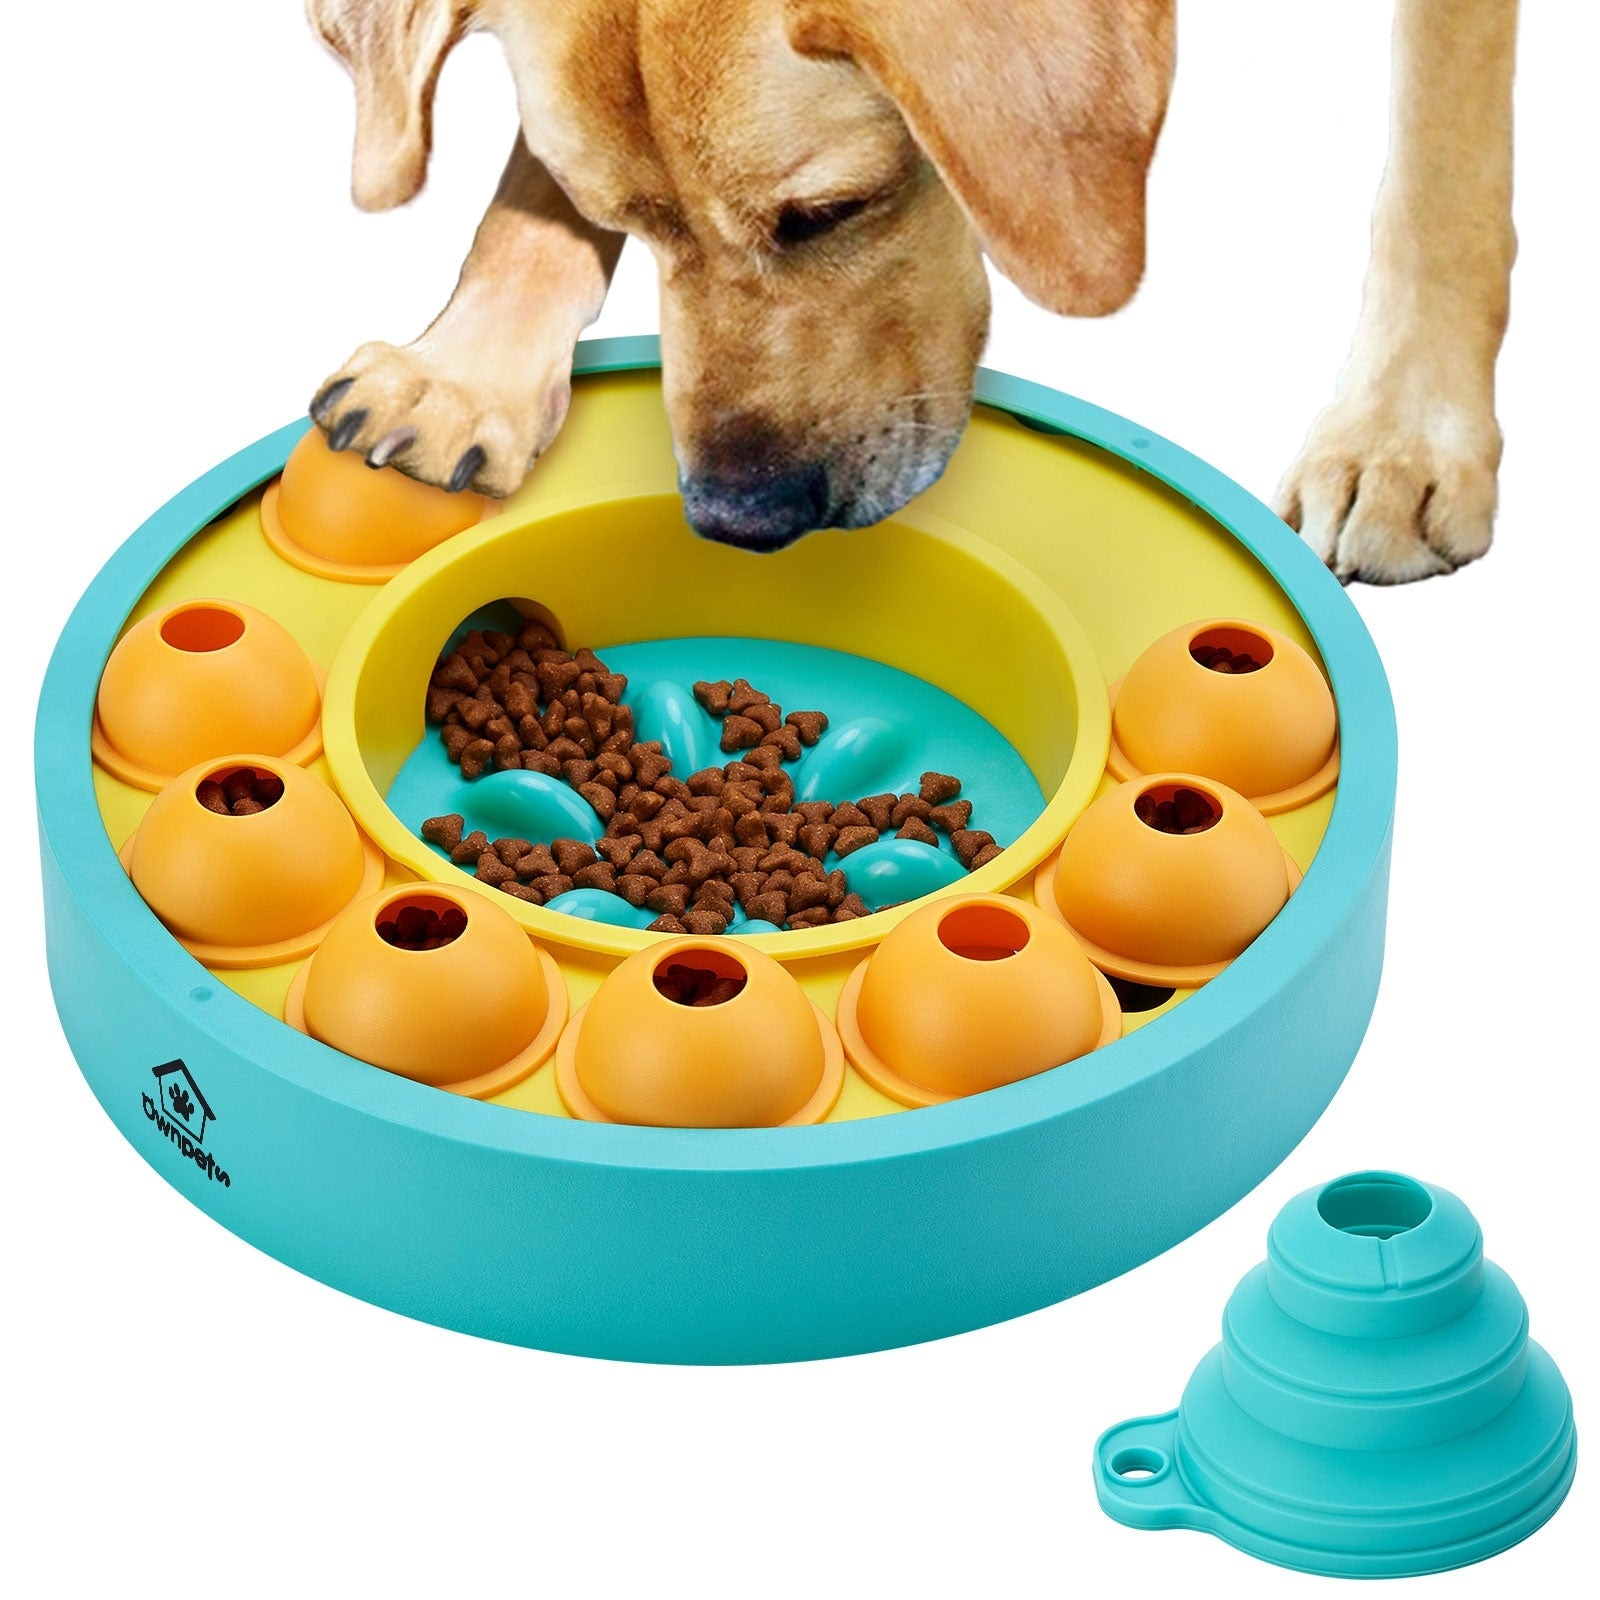 https://ak1.ostkcdn.com/images/products/is/images/direct/646905d9d1ae152f097e979905a56a2fe48b78b4/Interactive-Dog-Food-Puzzle-Slow-Feeder-Treat-Dispenser-Puzzle-Toy.jpg